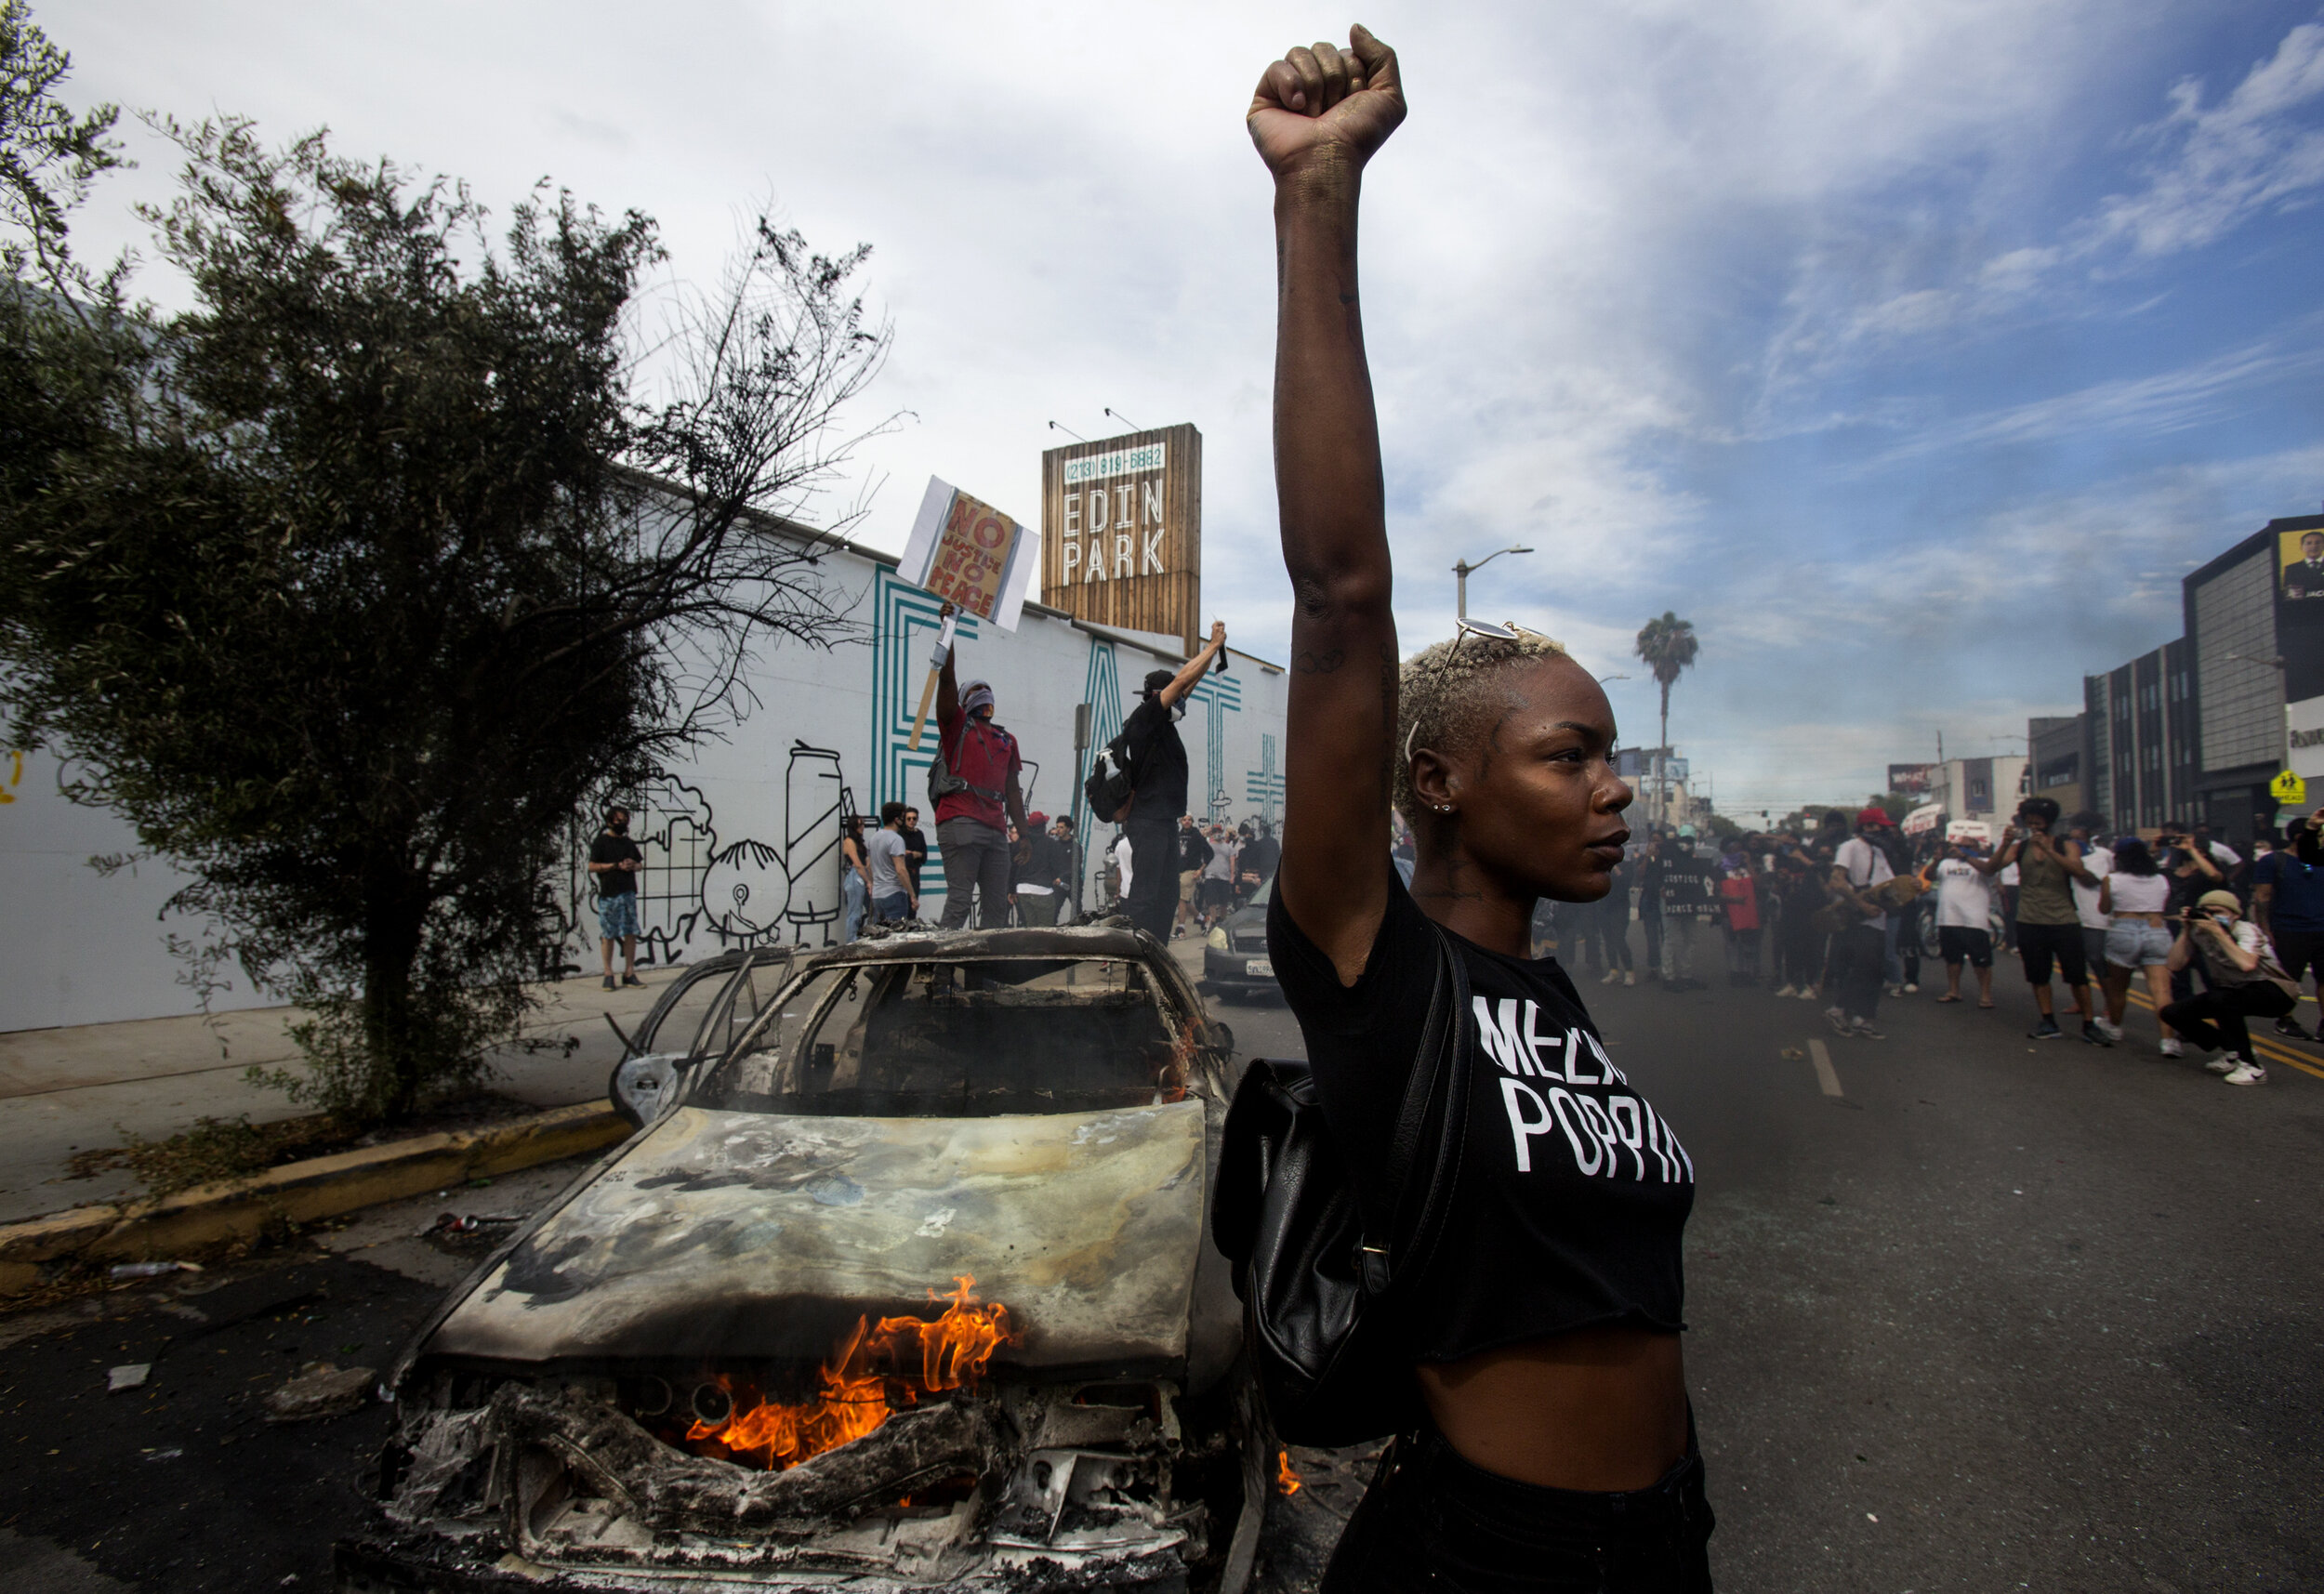  A protester raising her fist poses for photos next to a burning police vehicle during a protest over the death of George Floyd, a handcuffed black man in police custody in Minneapolis, in Los Angeles, Saturday, May 30, 2020.The 2020 Black Lives Matt